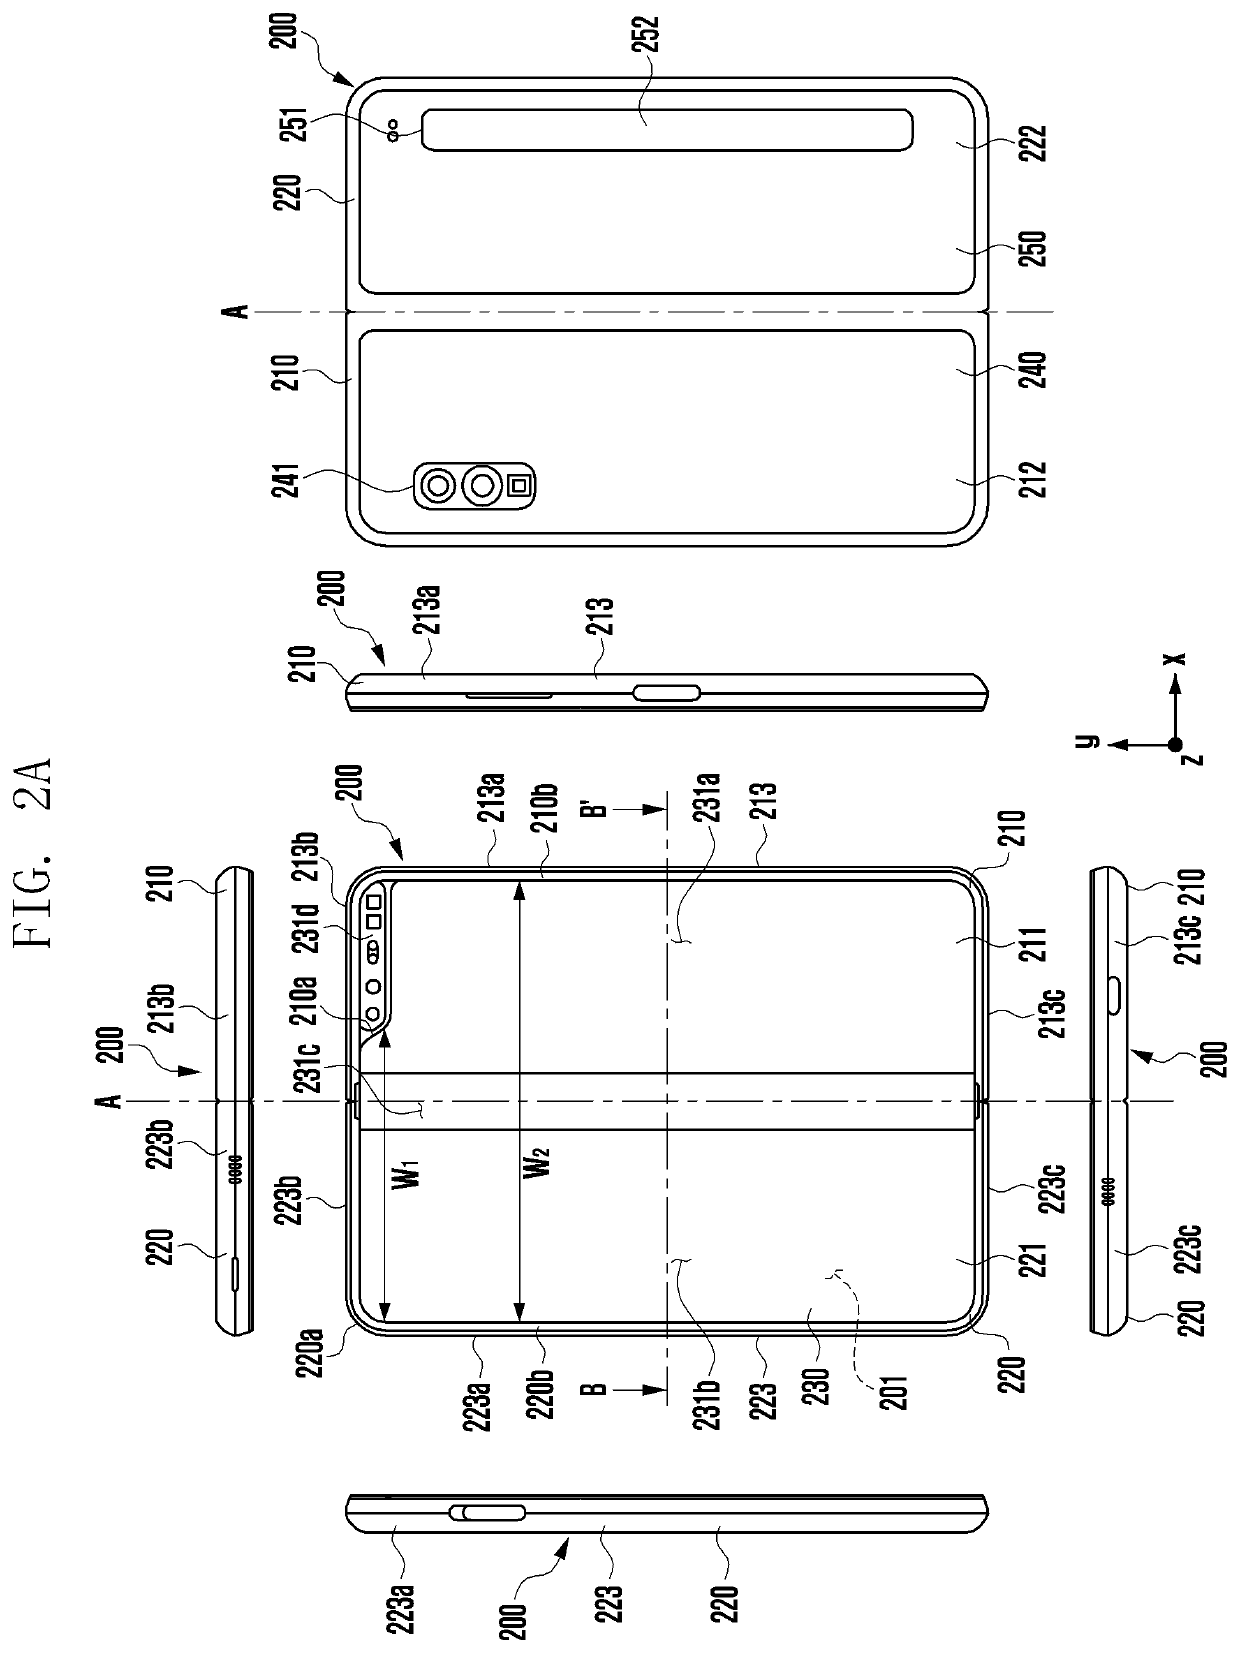 Foldable electronic device including integrated ground structure